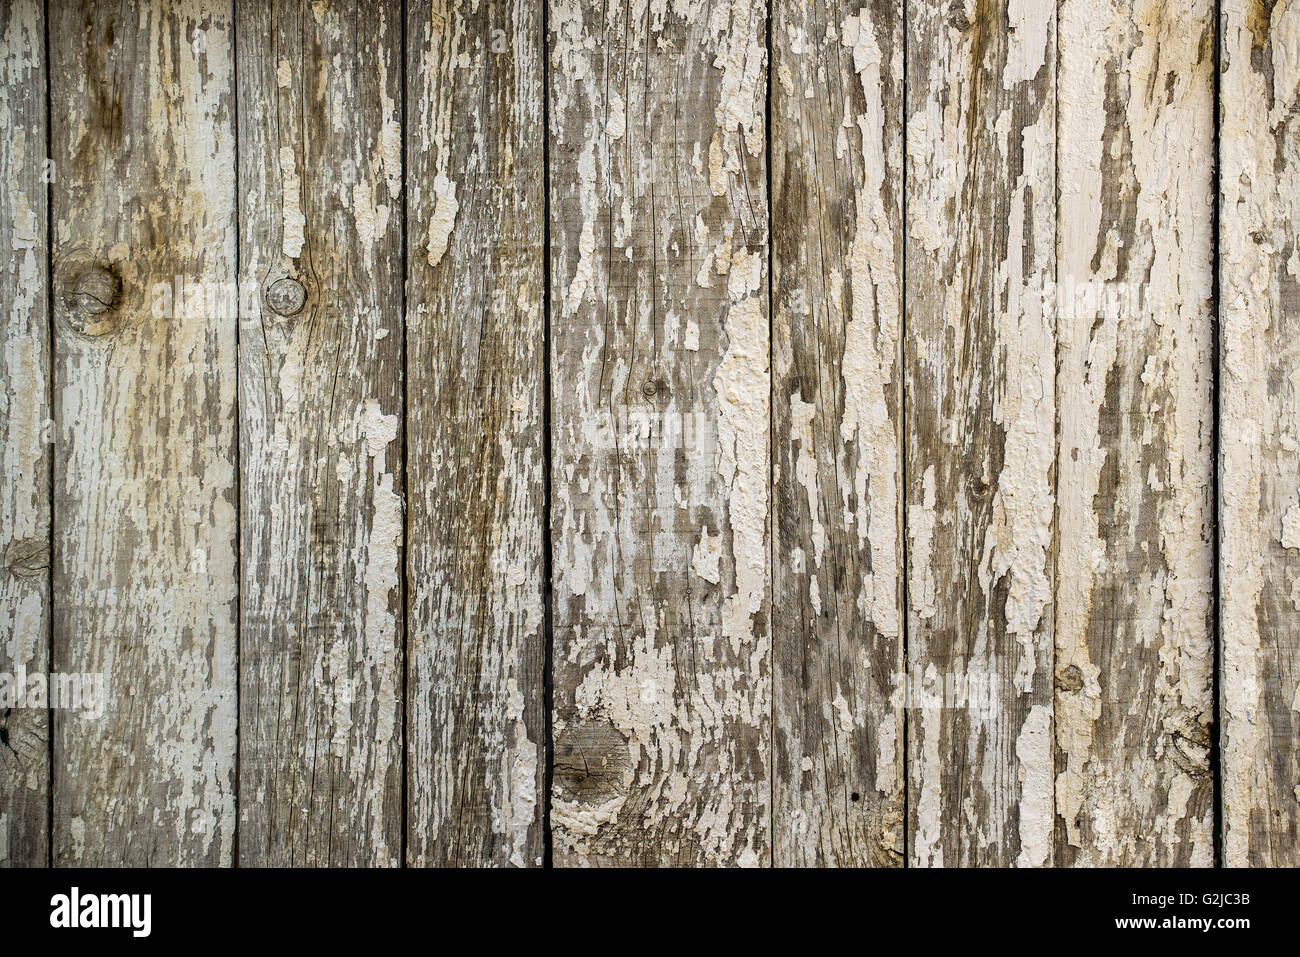 White paint peeling off the wooden wall, obsolete wood planks texture Stock Photo